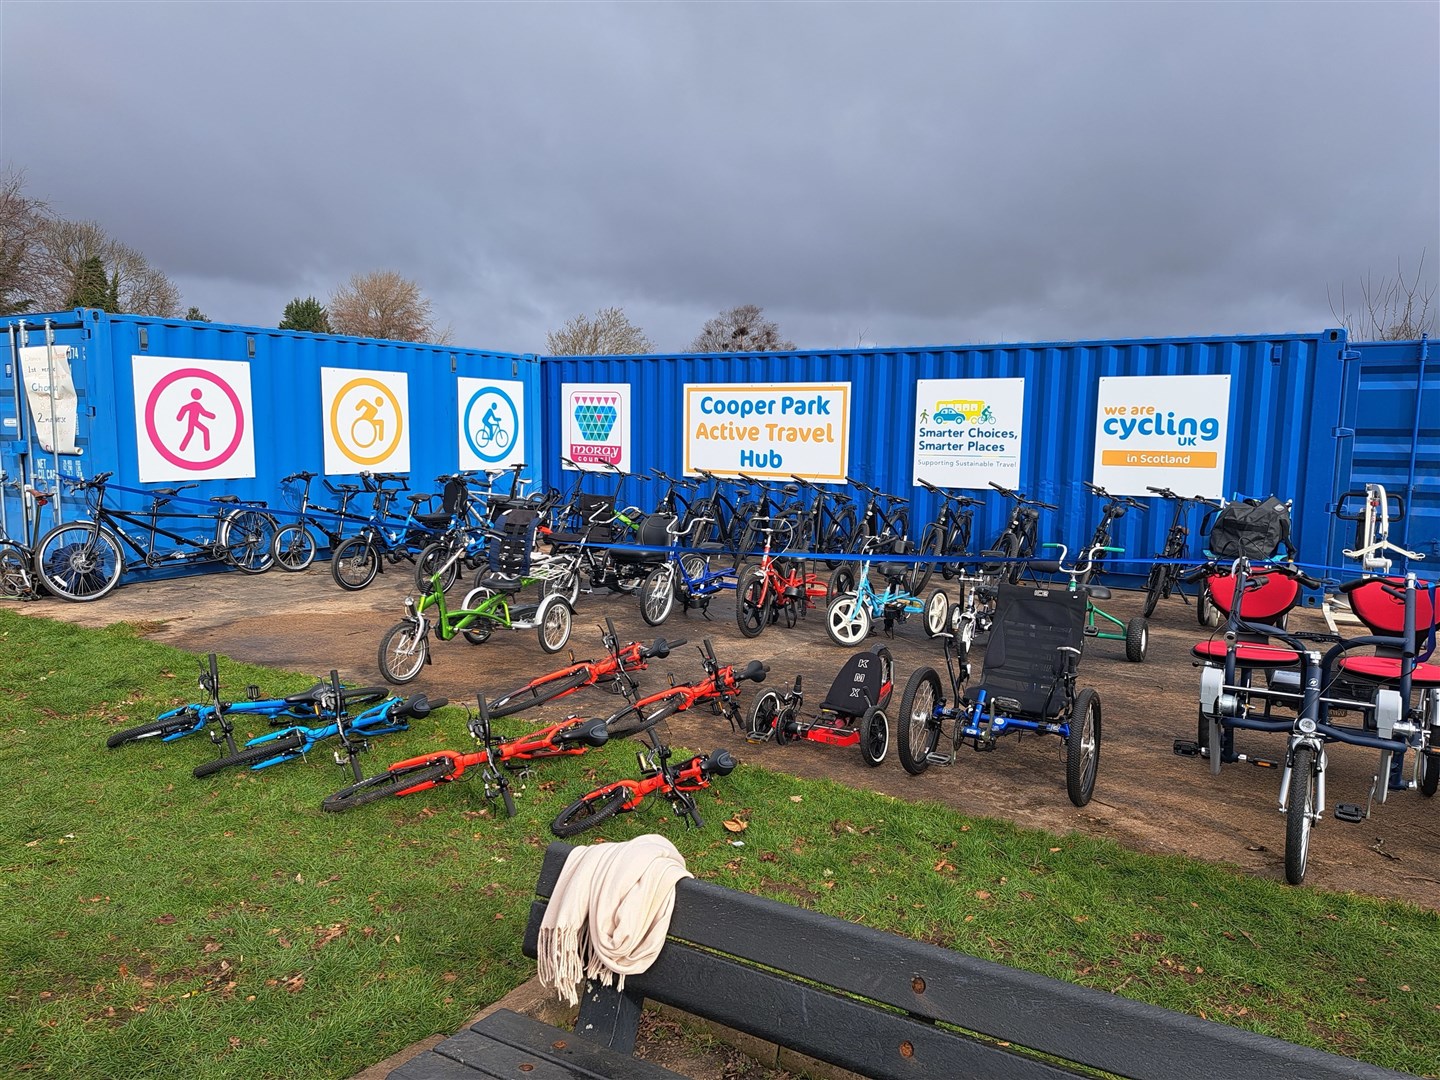 The Cooper Park Travel Hub in Elgin is home to a number of different types of bicycles.